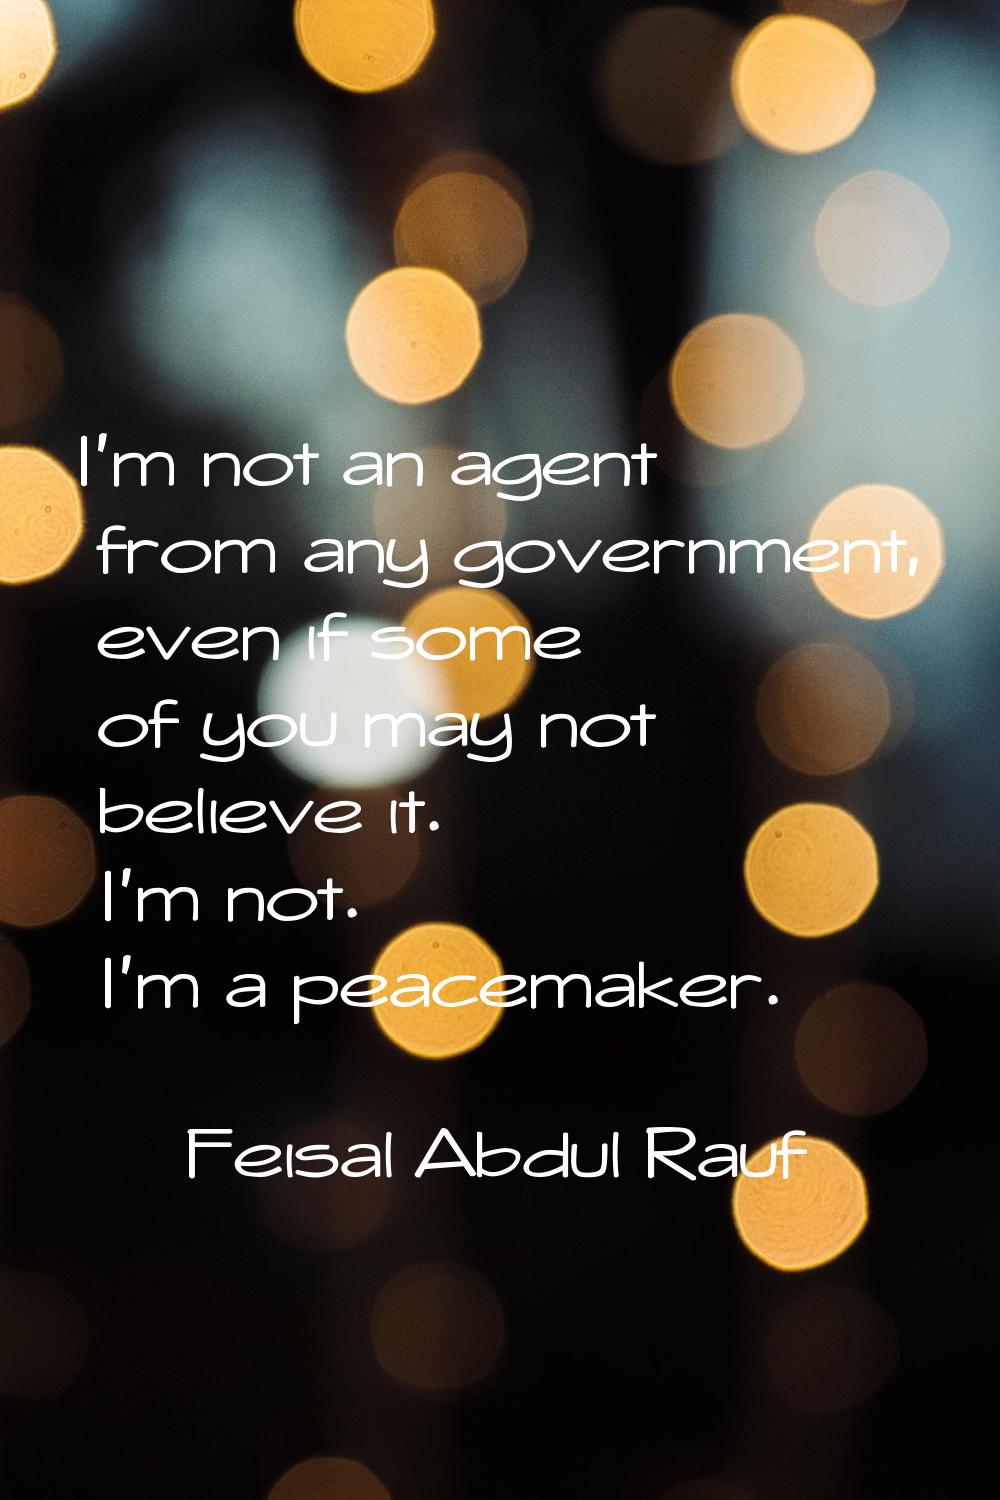 I'm not an agent from any government, even if some of you may not believe it. I'm not. I'm a peacem